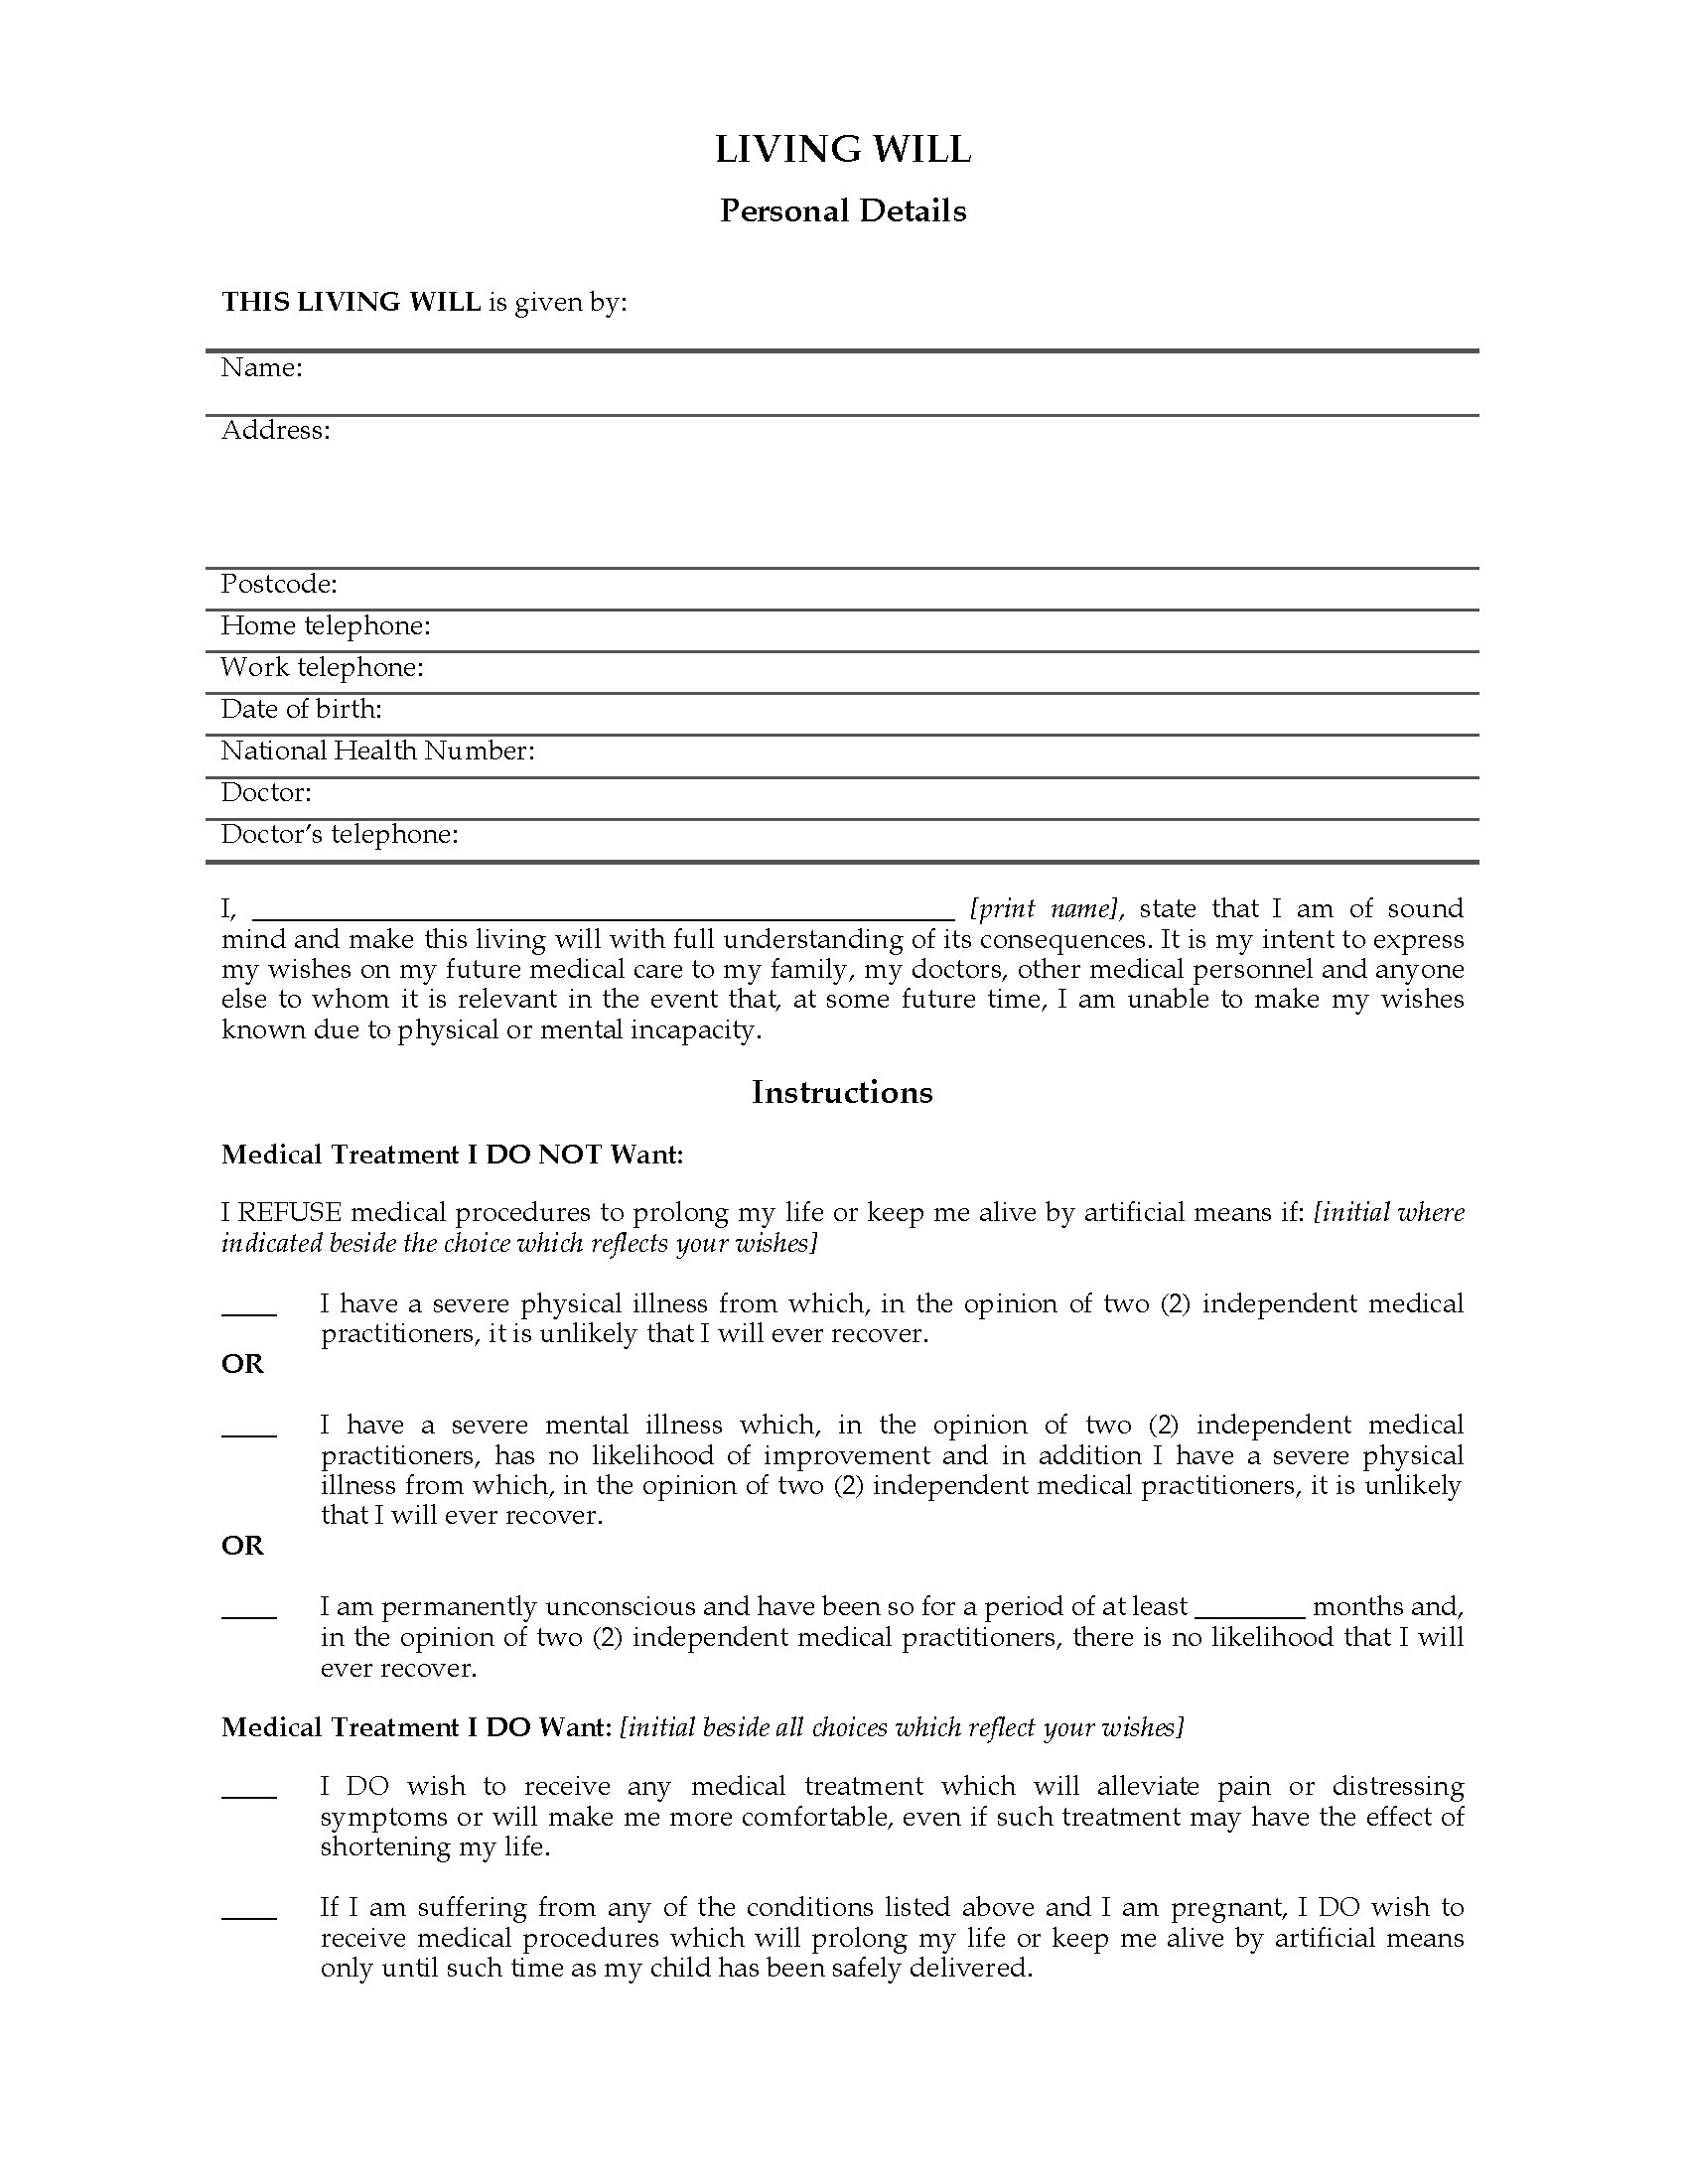 Free Printable Will Forms UK_41635